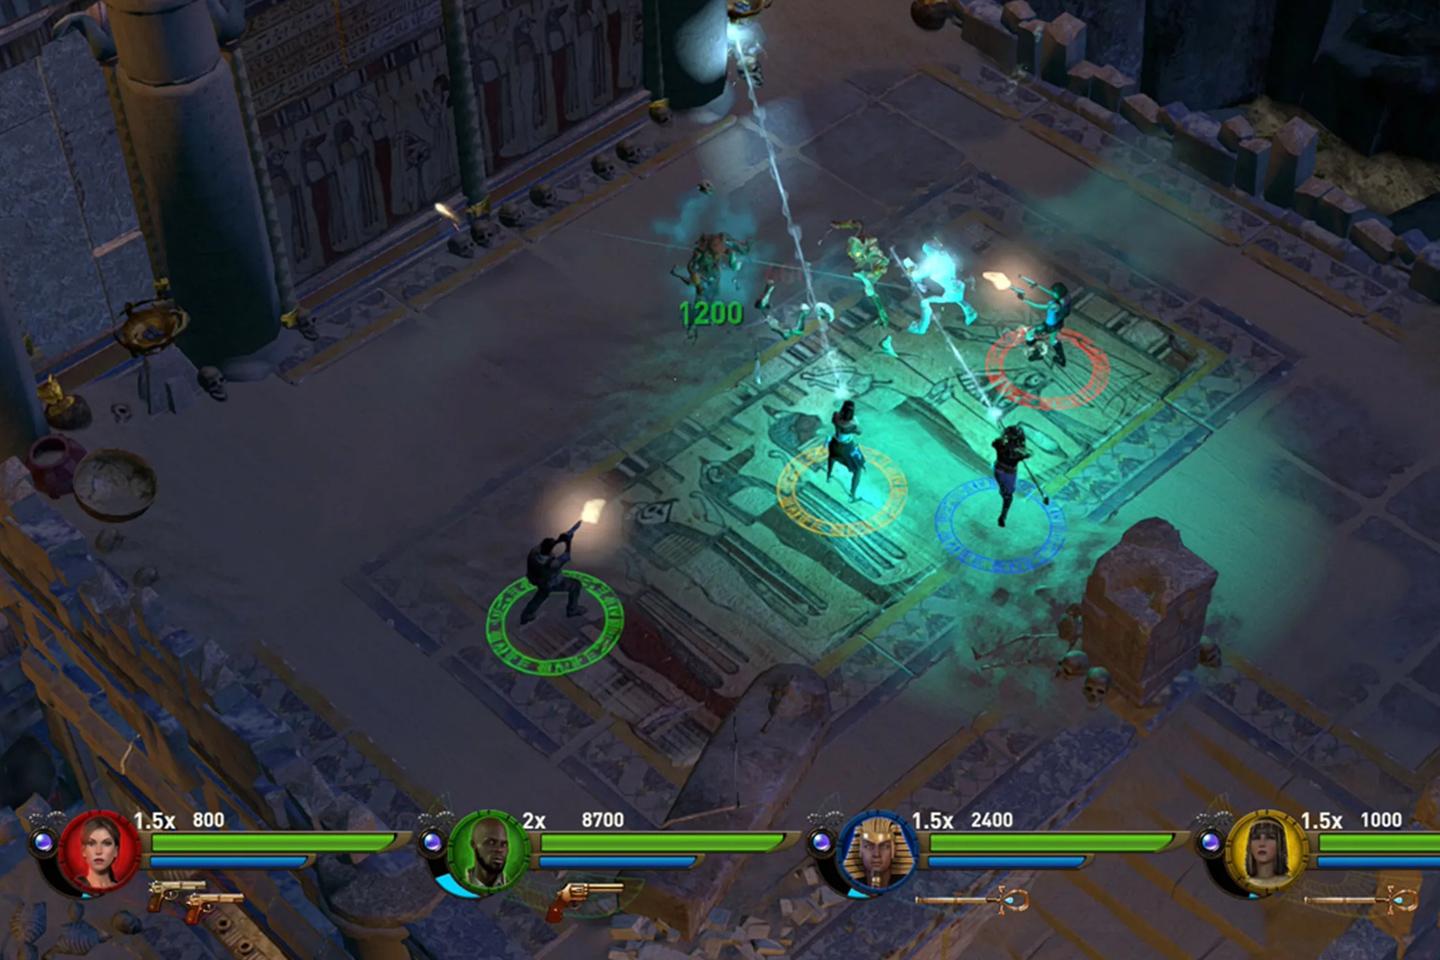 An in-game scene from a Tomb Raider game showing multiple characters in a blue-glowing magical circle, engaged in battle with spectral enemies in an Egyptian tomb-like setting.